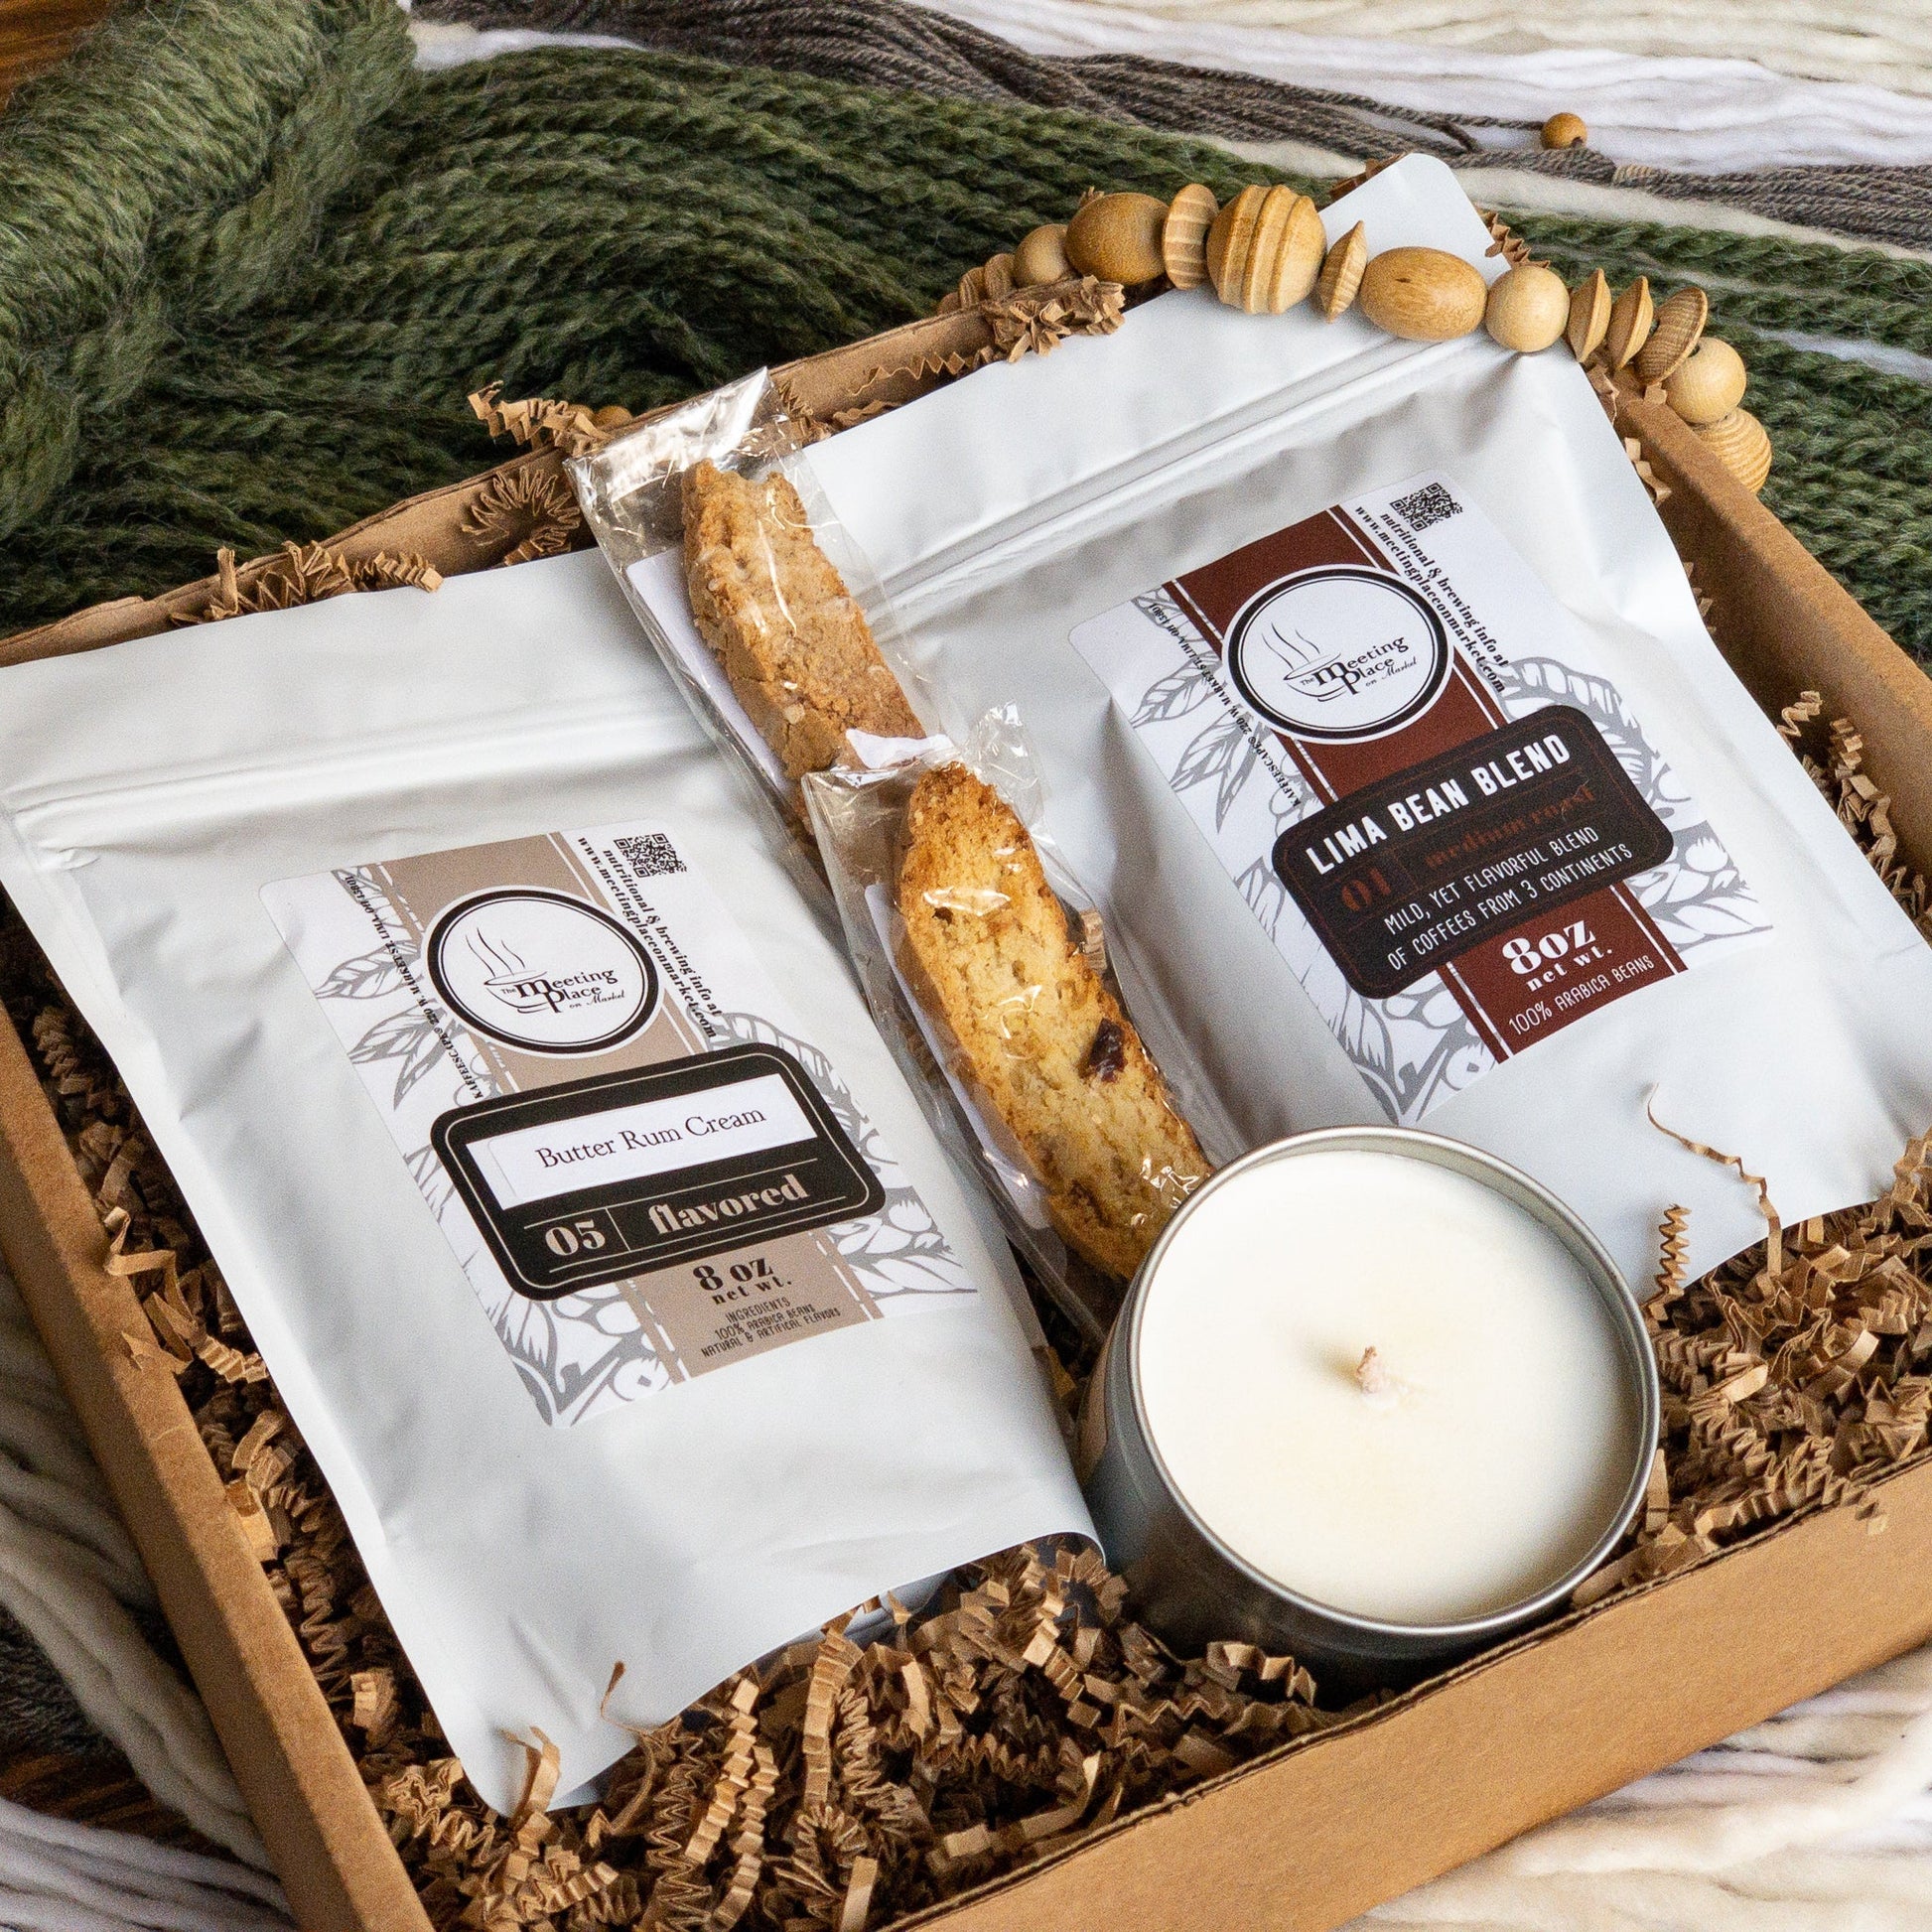 Handmade Candle and Gourmet Coffee Gift Basket – The Meeting Place on Market